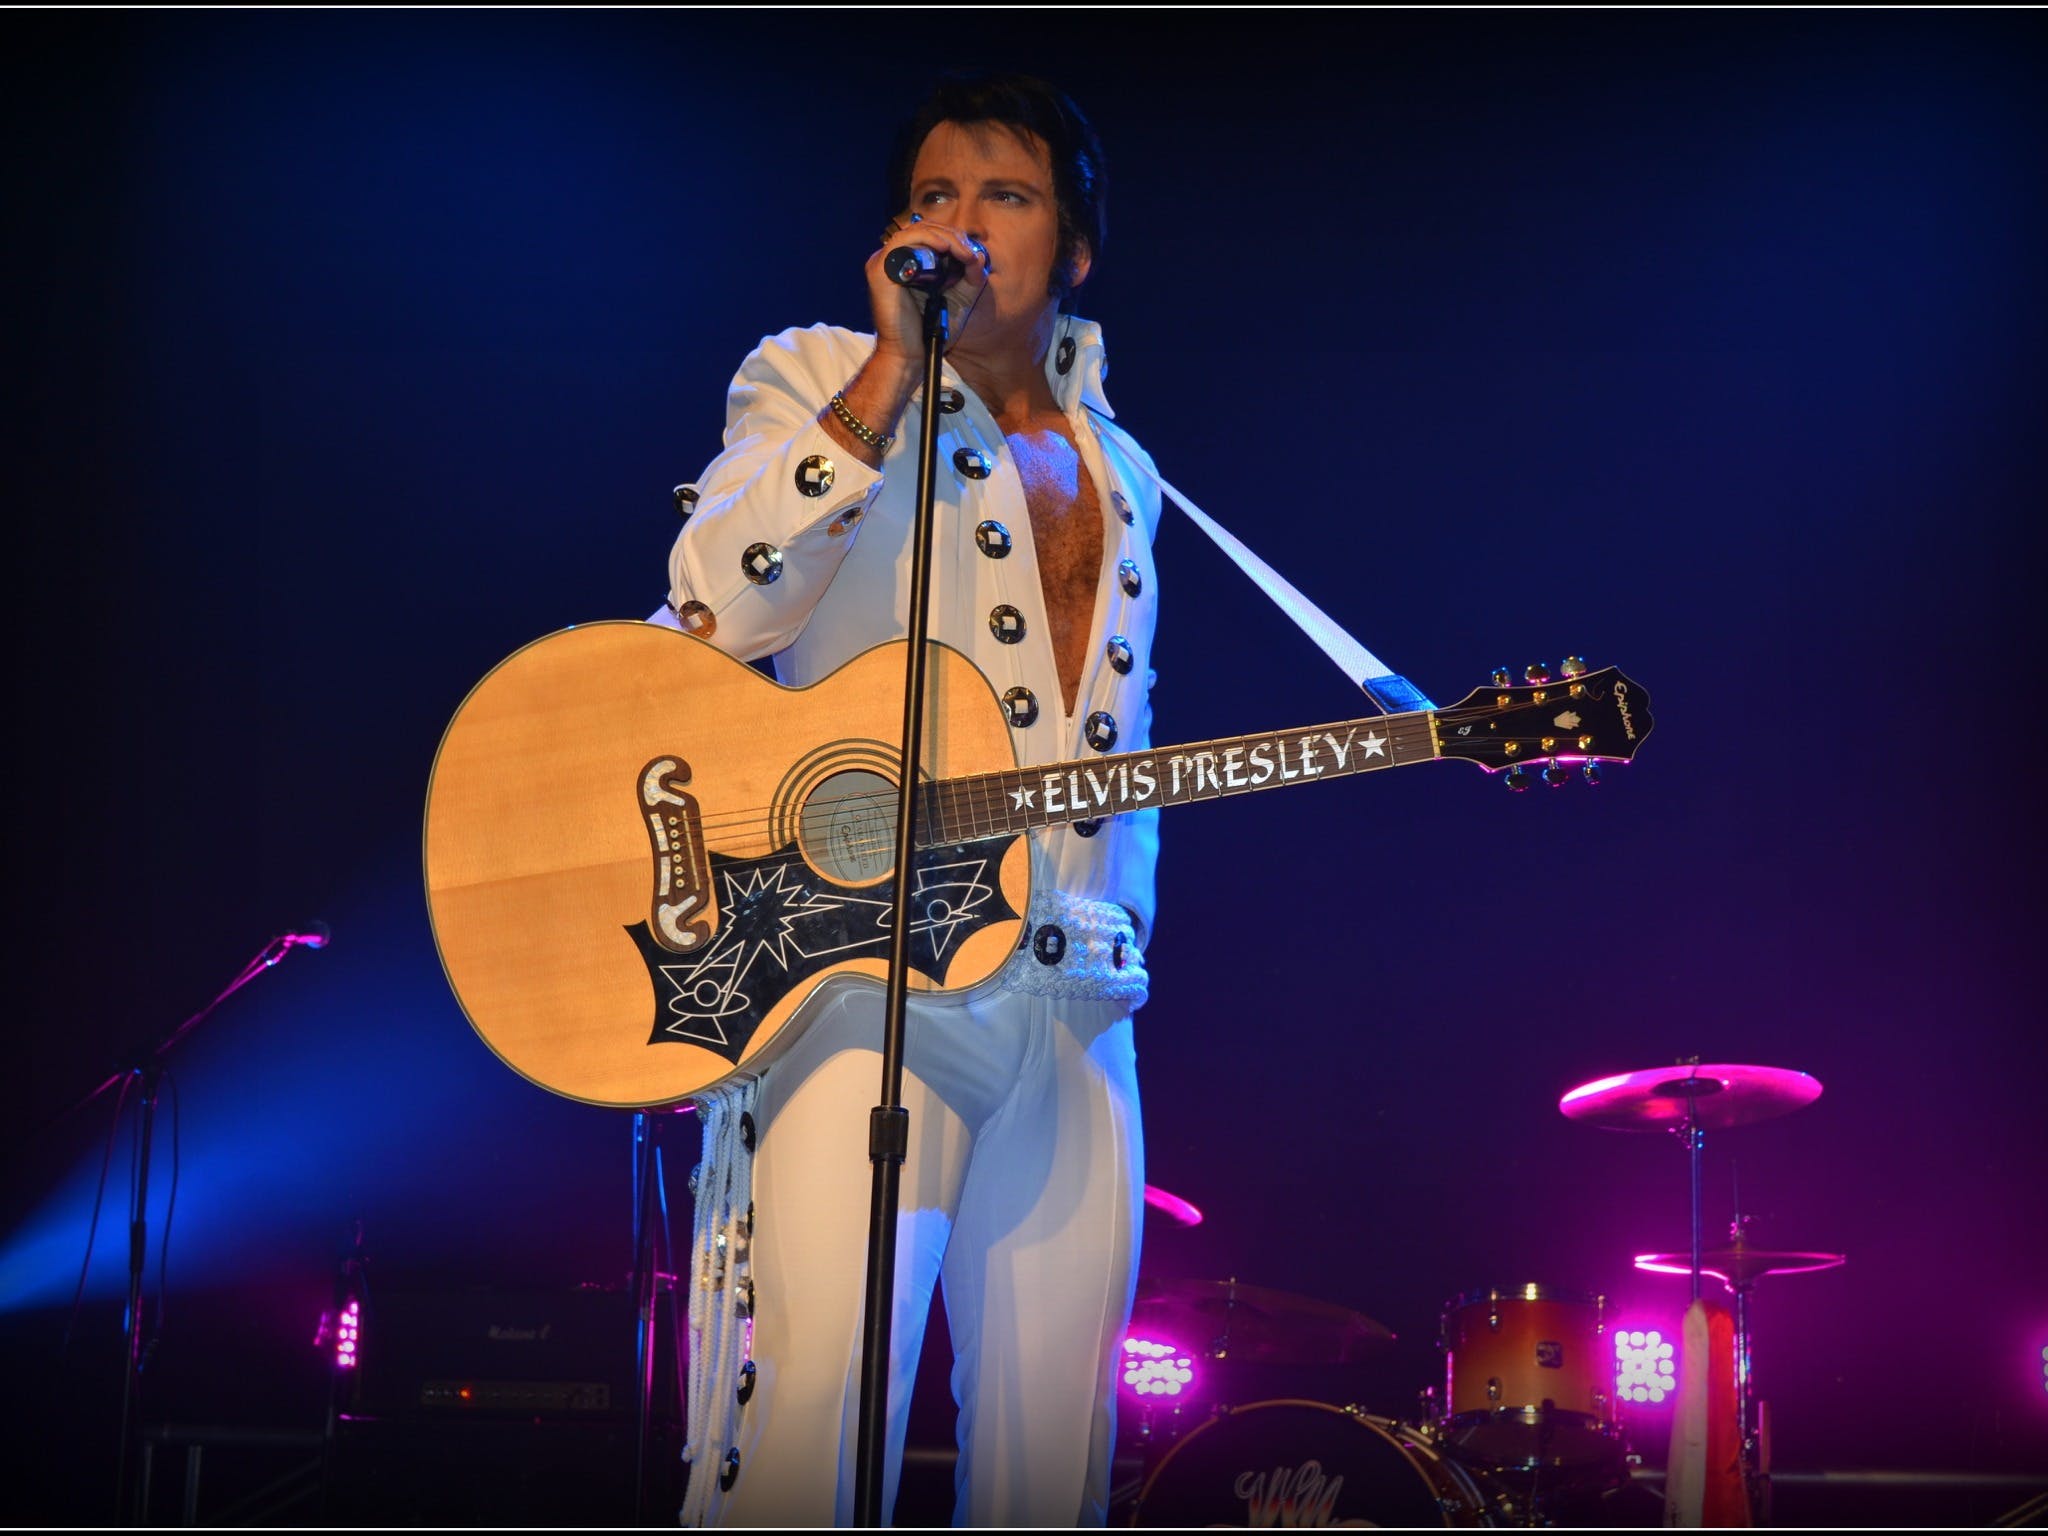 Elvis Forever - Damian Mullin 'Up Close and Personal' - C Tourism